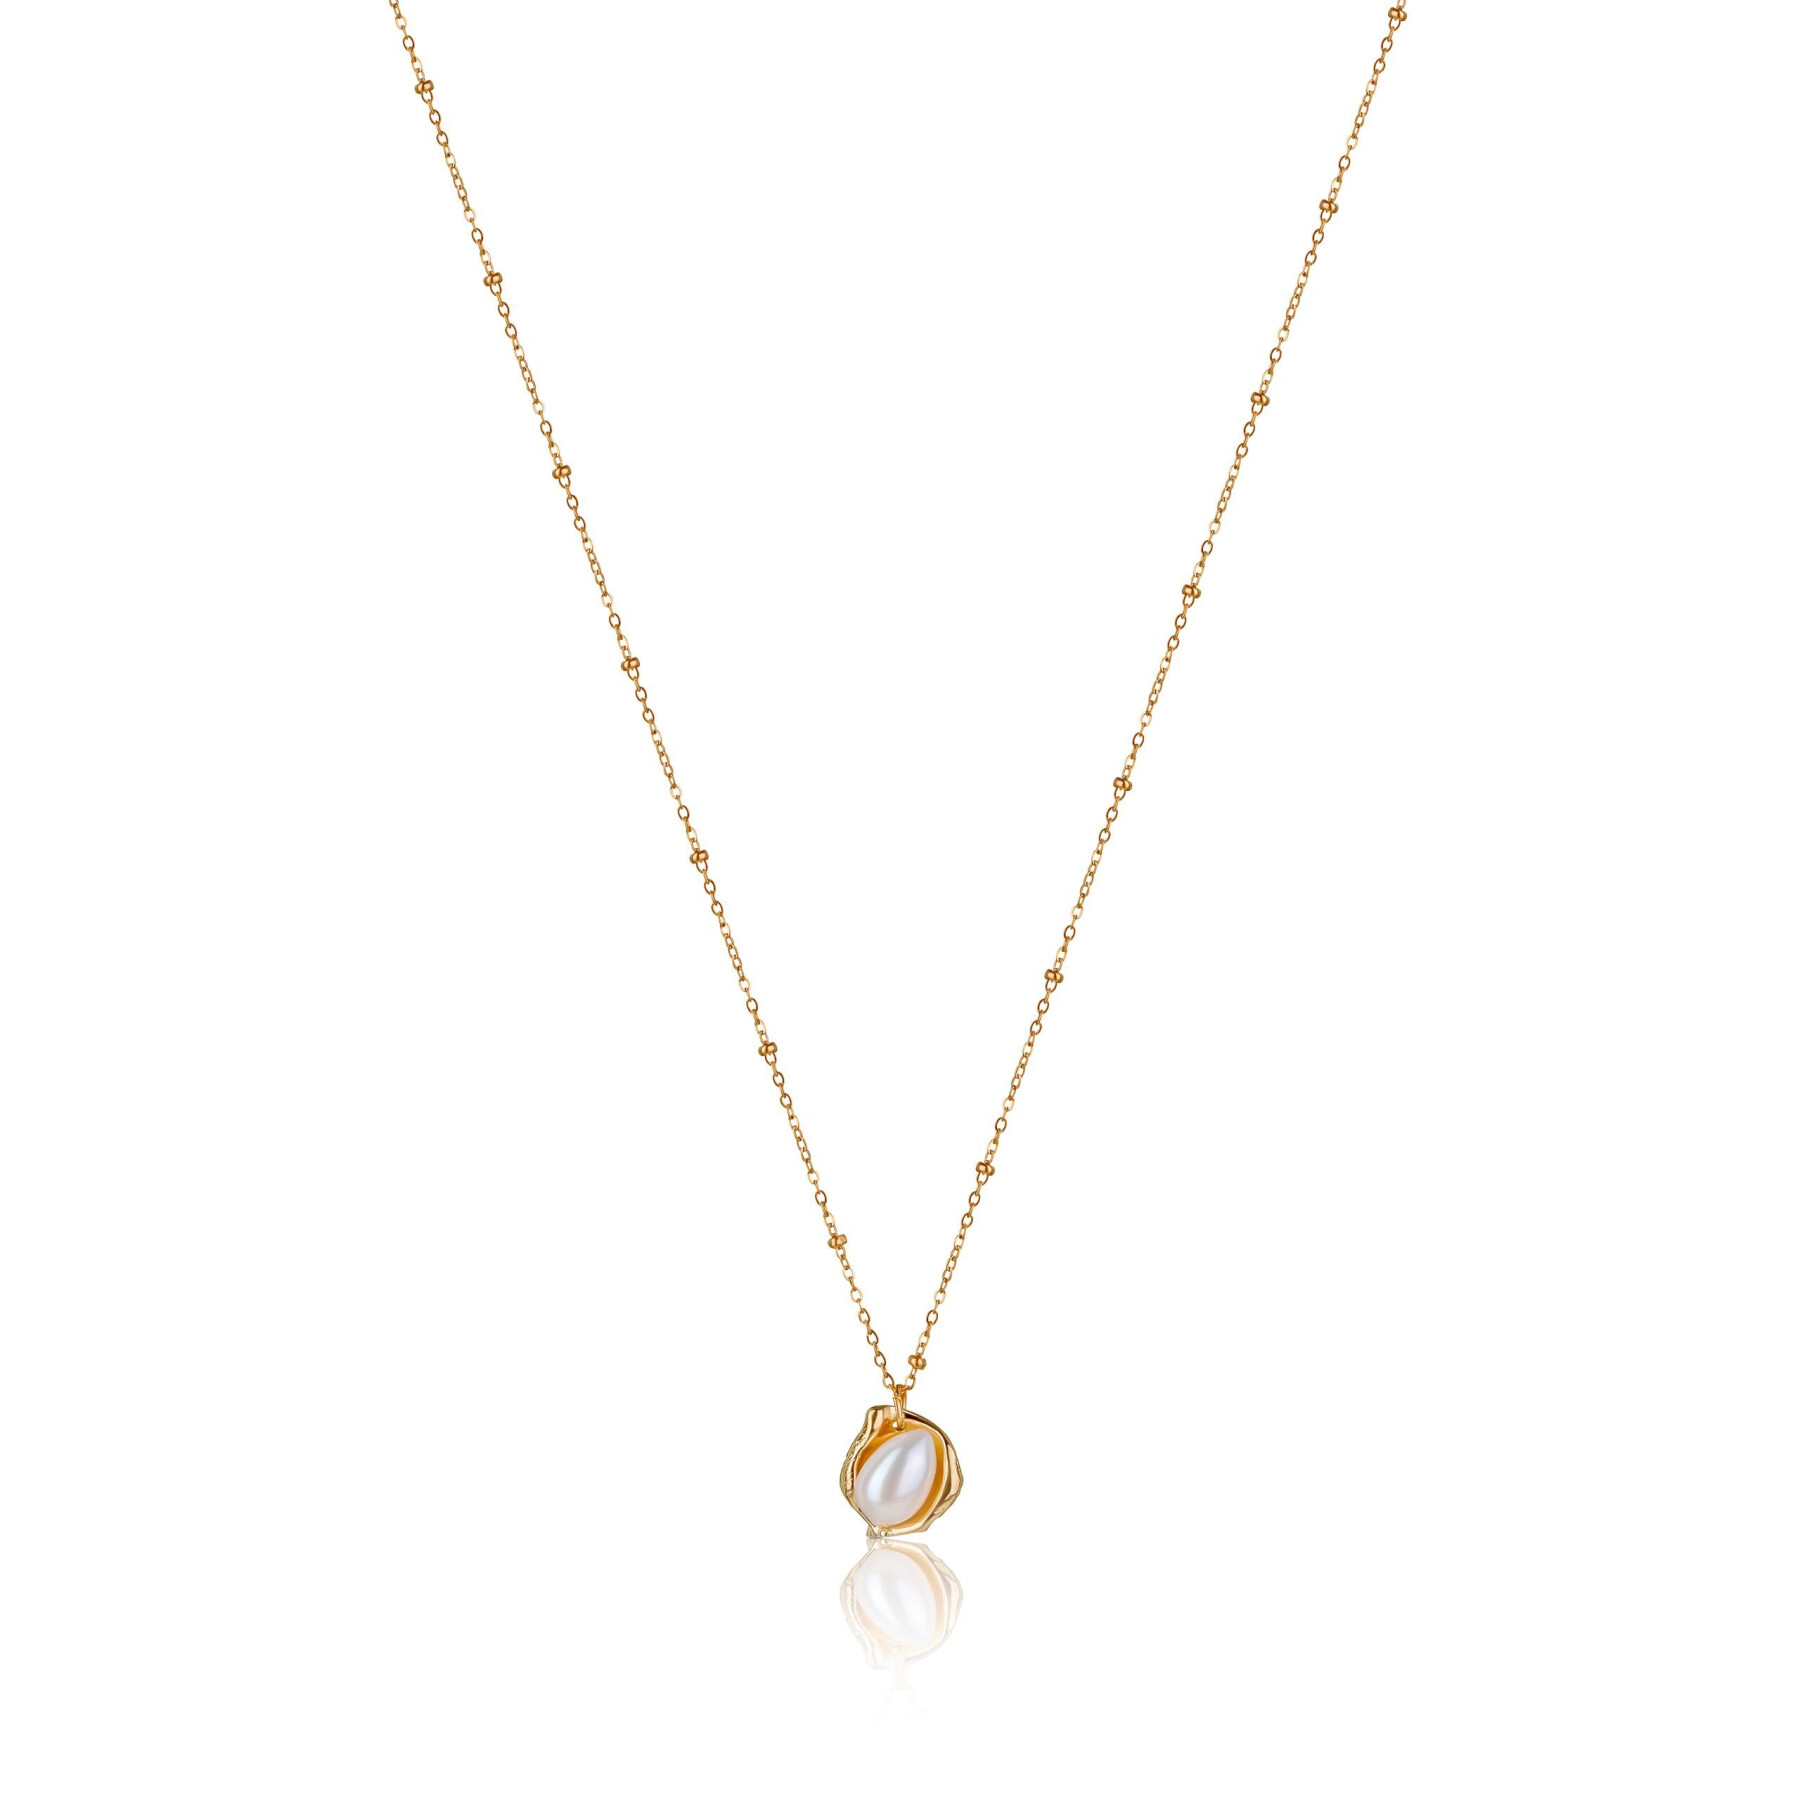 Women's necklace Isabella Ford Lucy